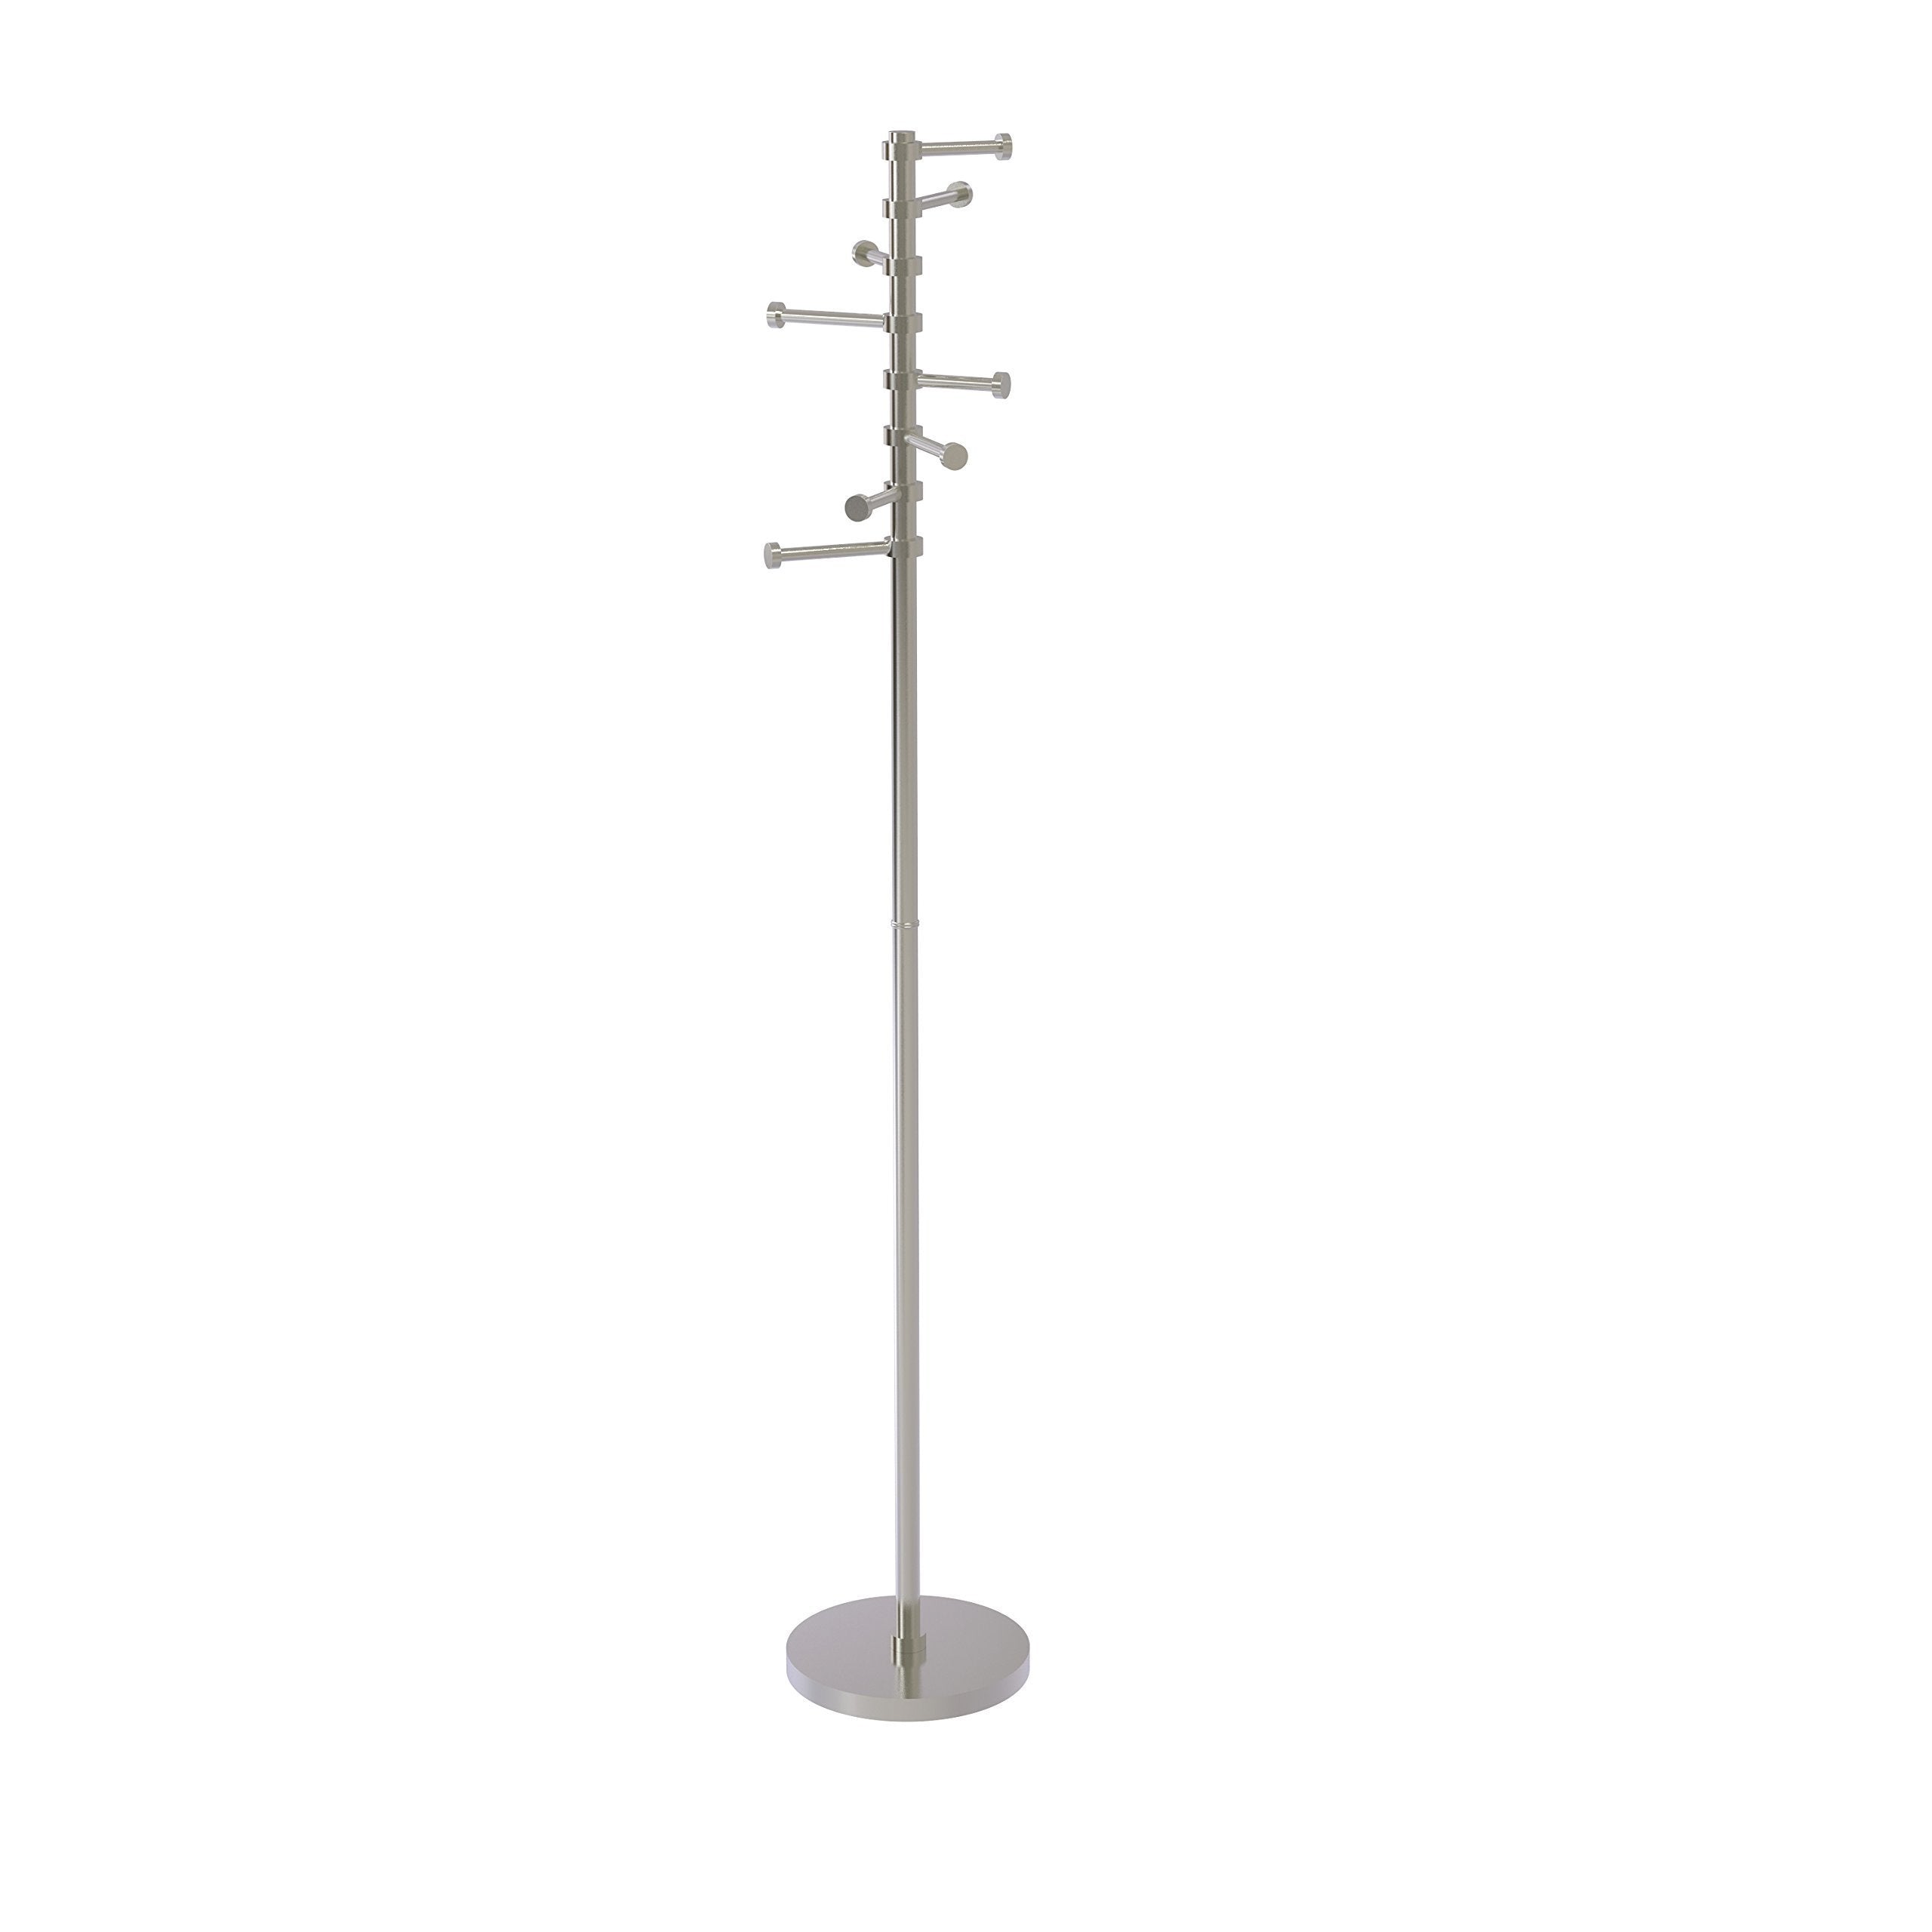 Related allied brass cs 1 sn free standing coat rack with six pivoting pegs